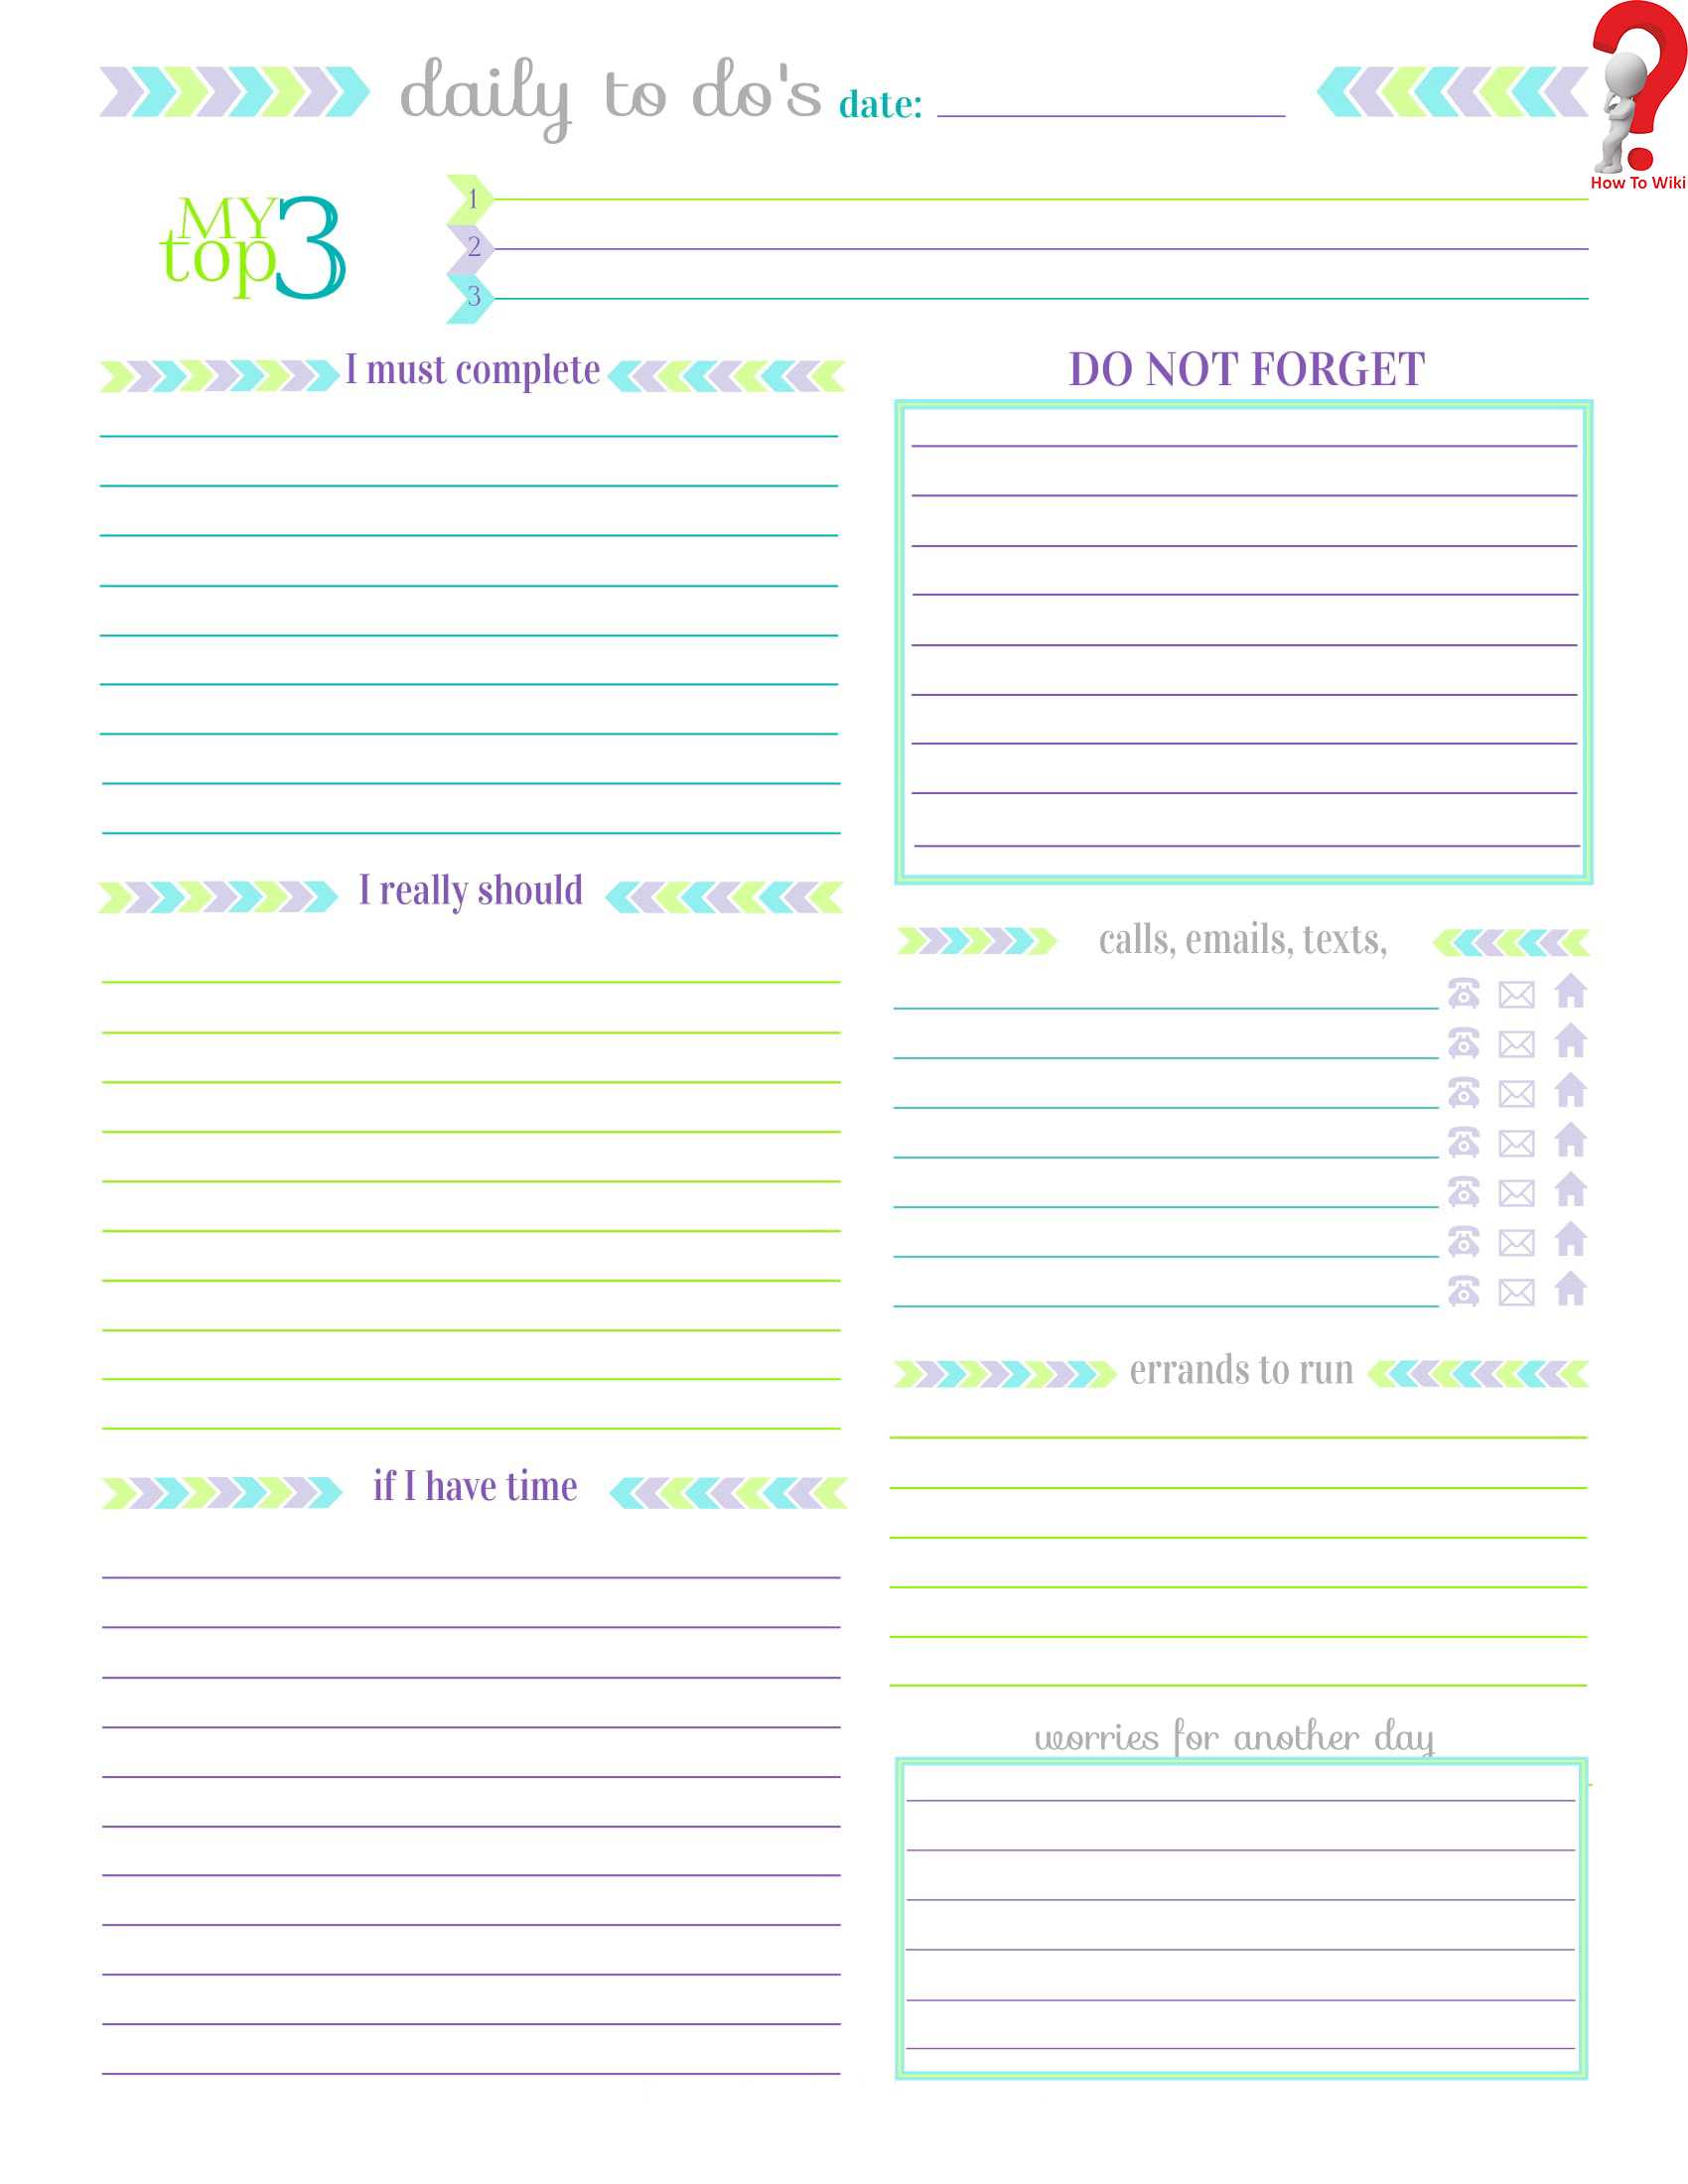 Daily Routine Planner